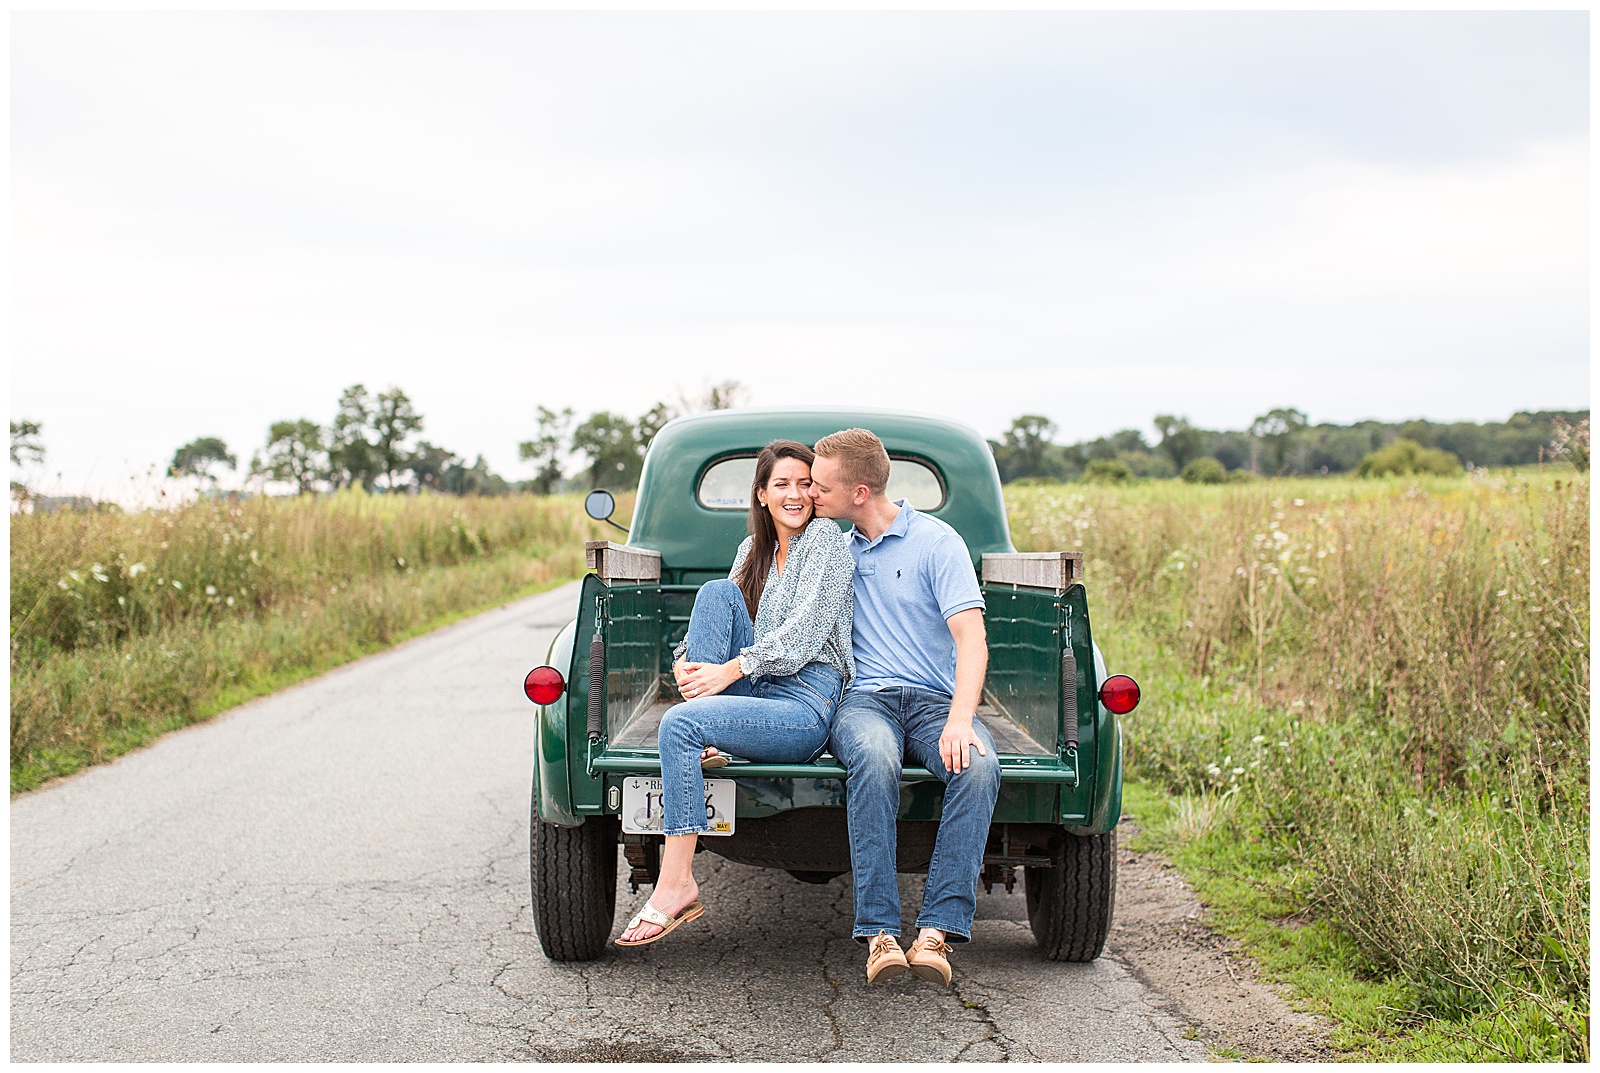 Vintage truck used for a couple's engagement photos in Rhode Island